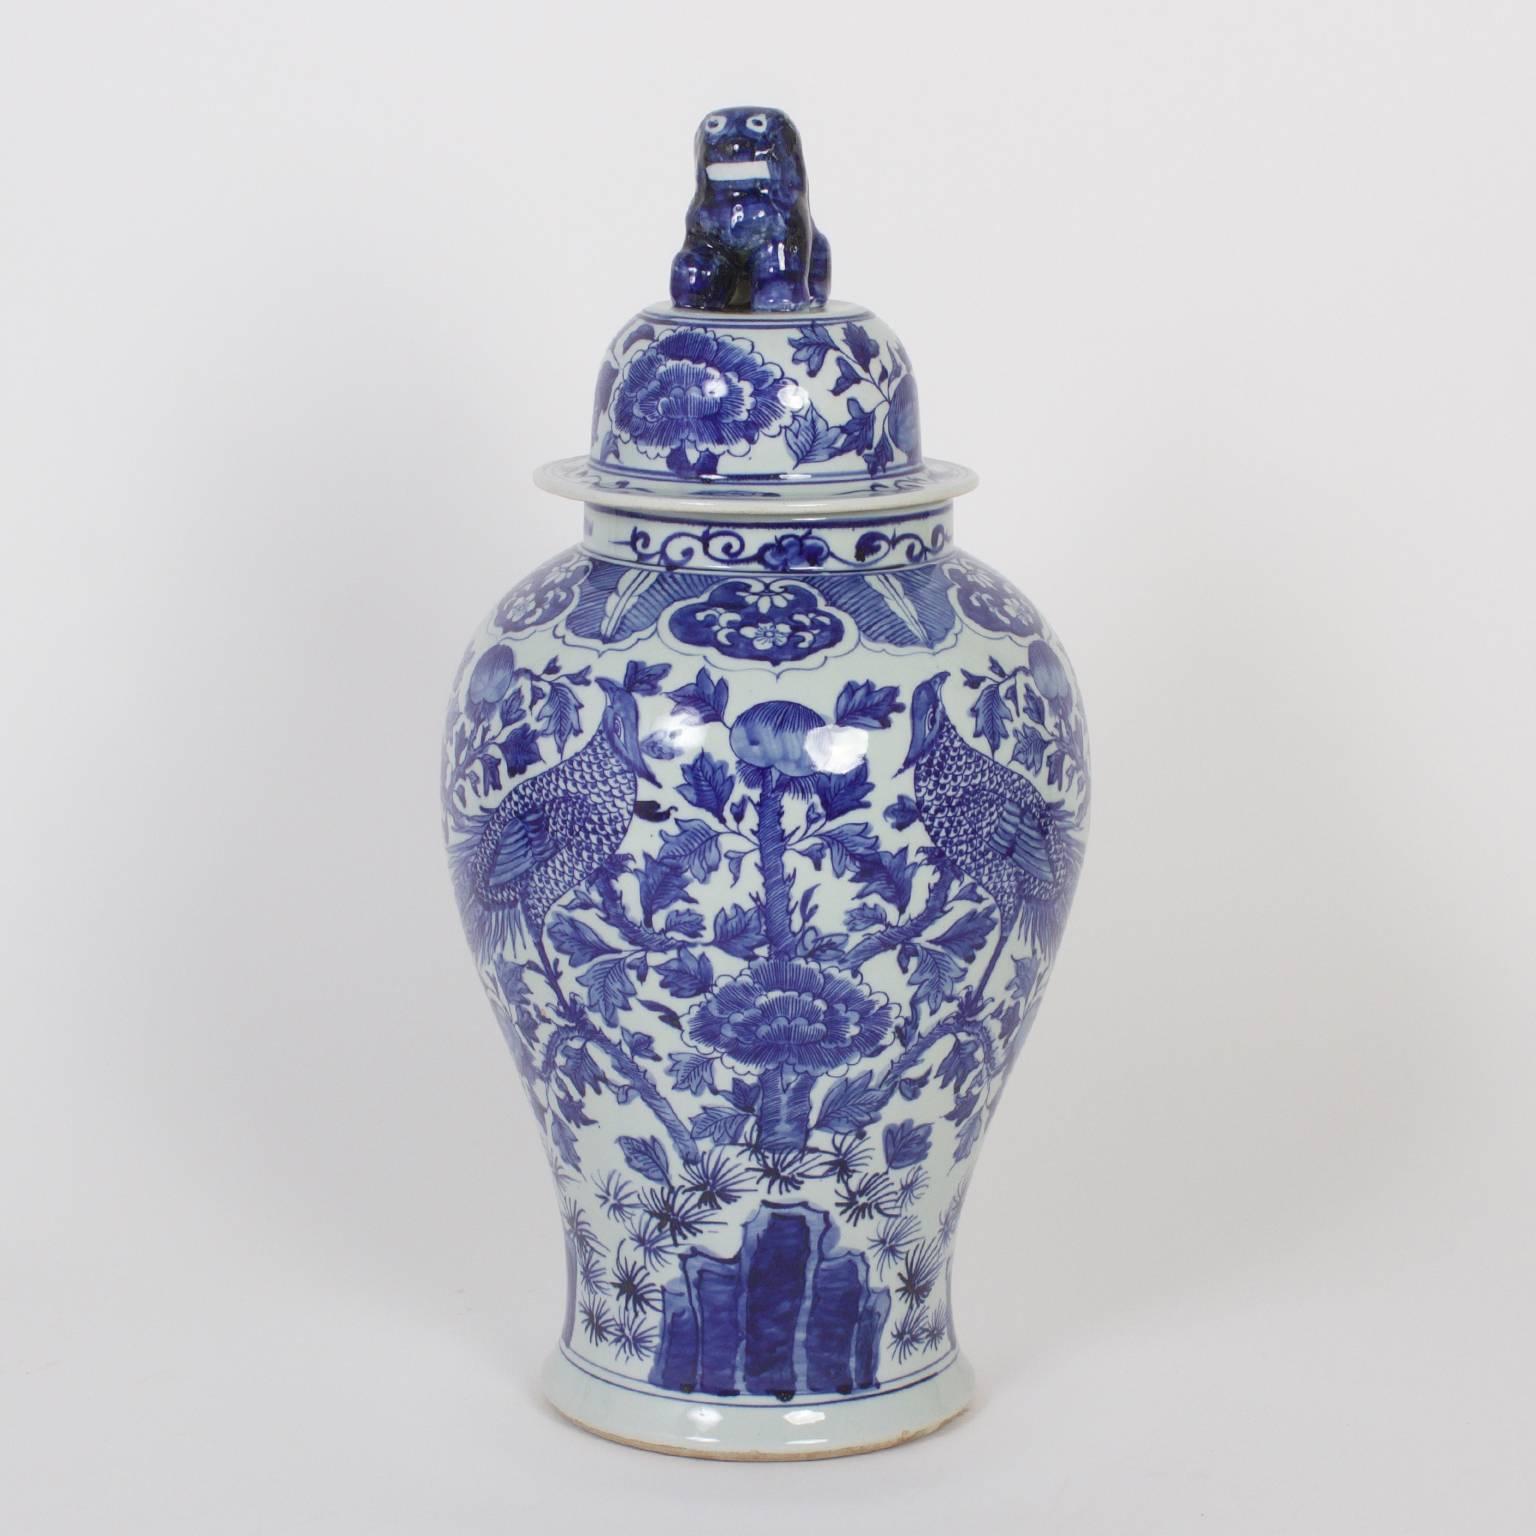 Inspired pair of Chinese export style blue and white porcelain lidded jars decorated with two phoenix birds facing centre over an elaborate floral field.

